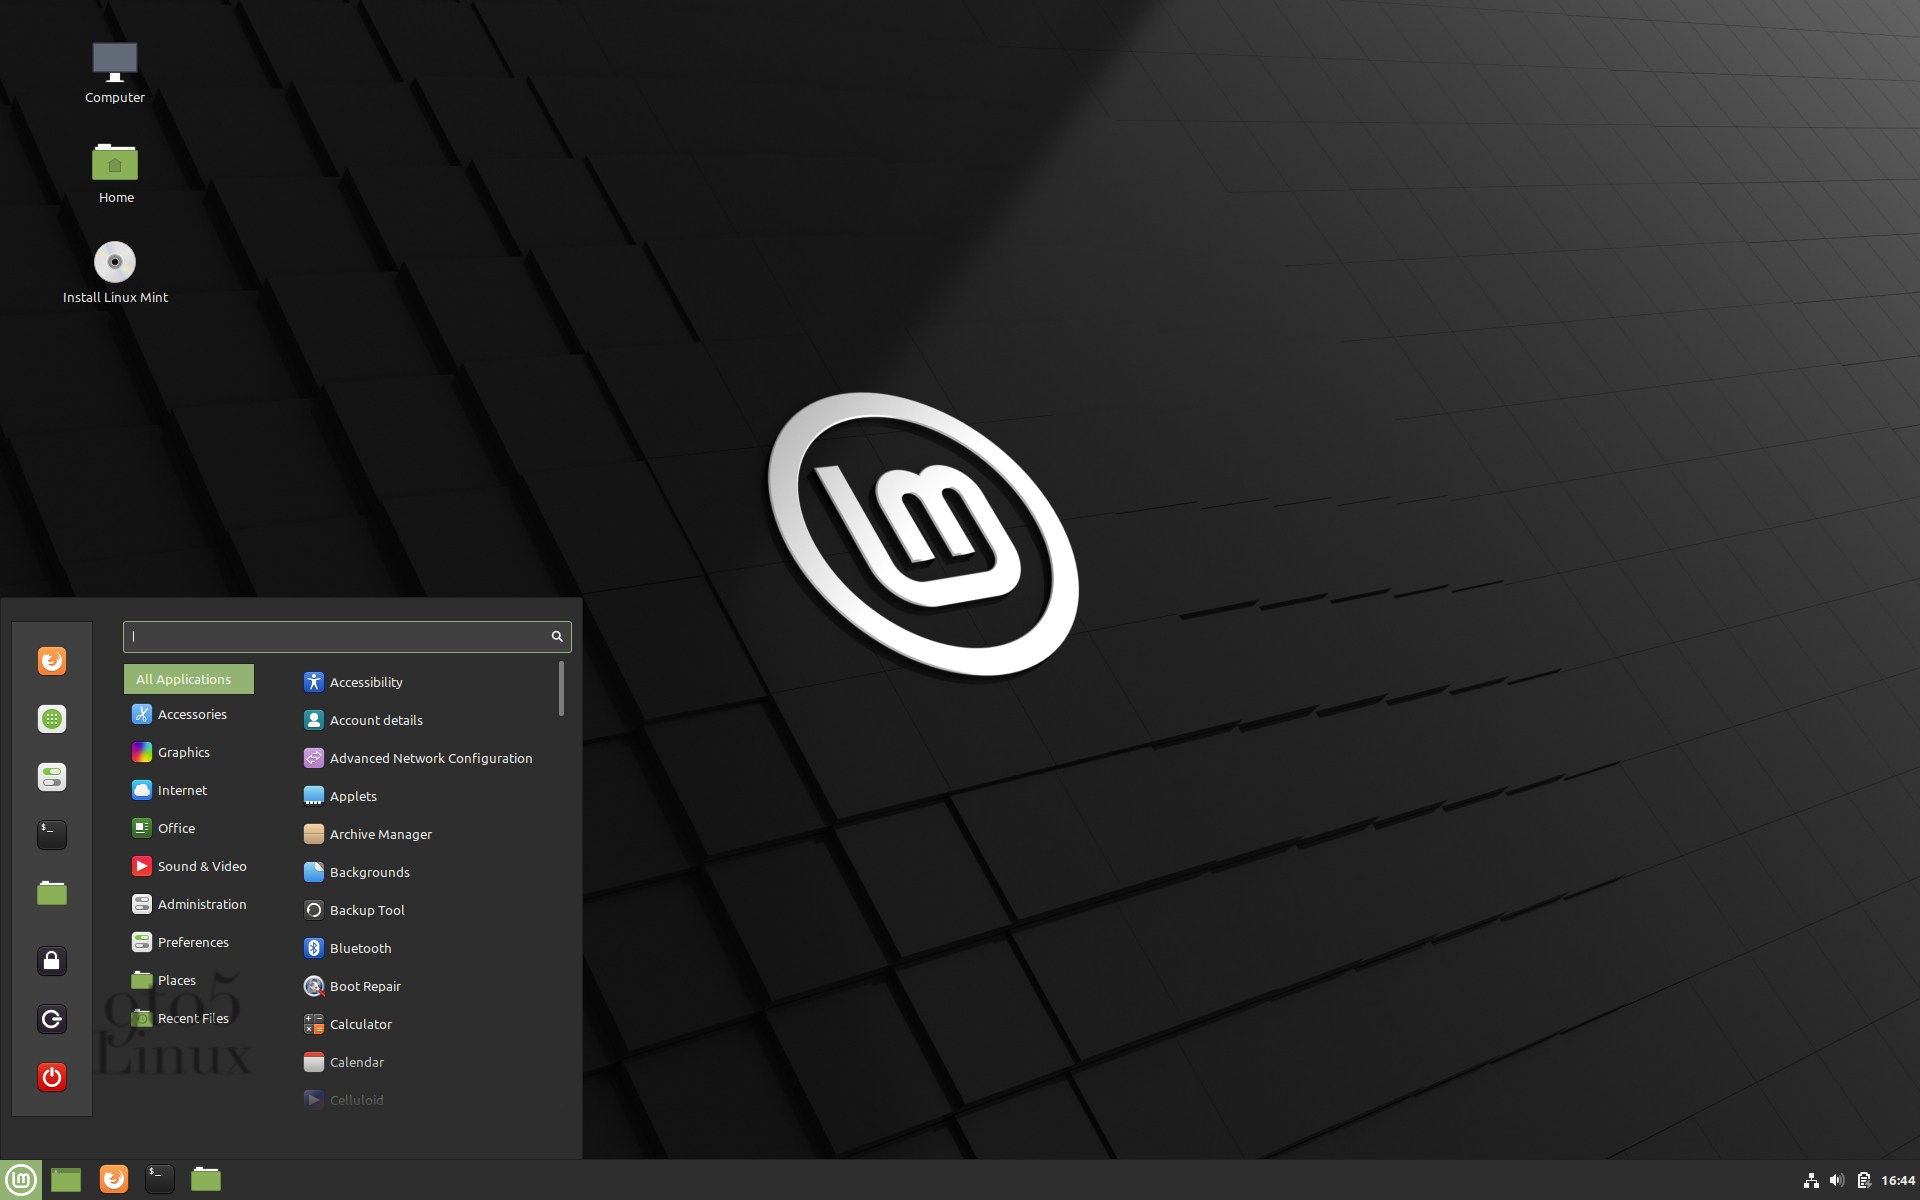 Linux Mint 20.1 “Ulyssa” Is Now Available for Download, This Is What’s New